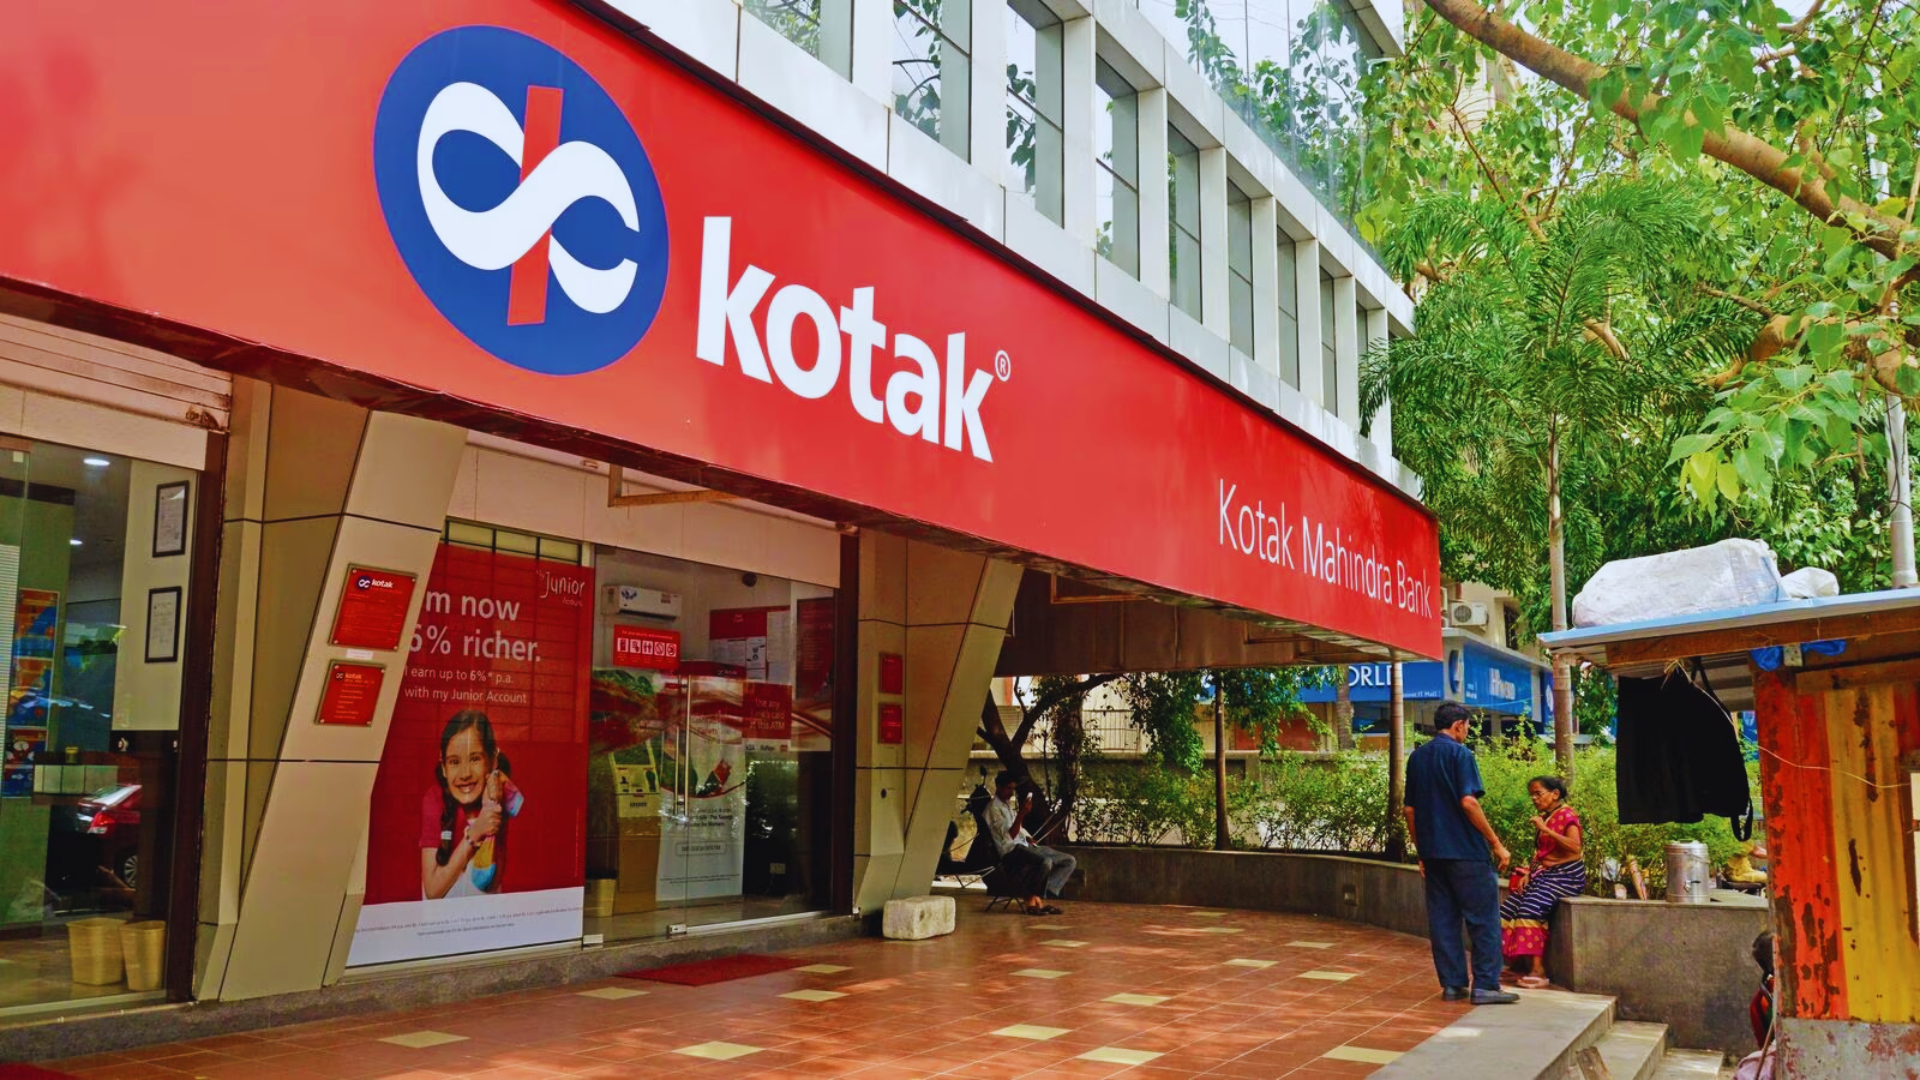 Manian From Kotak Competes With Federal Bank Executives For CEO Position